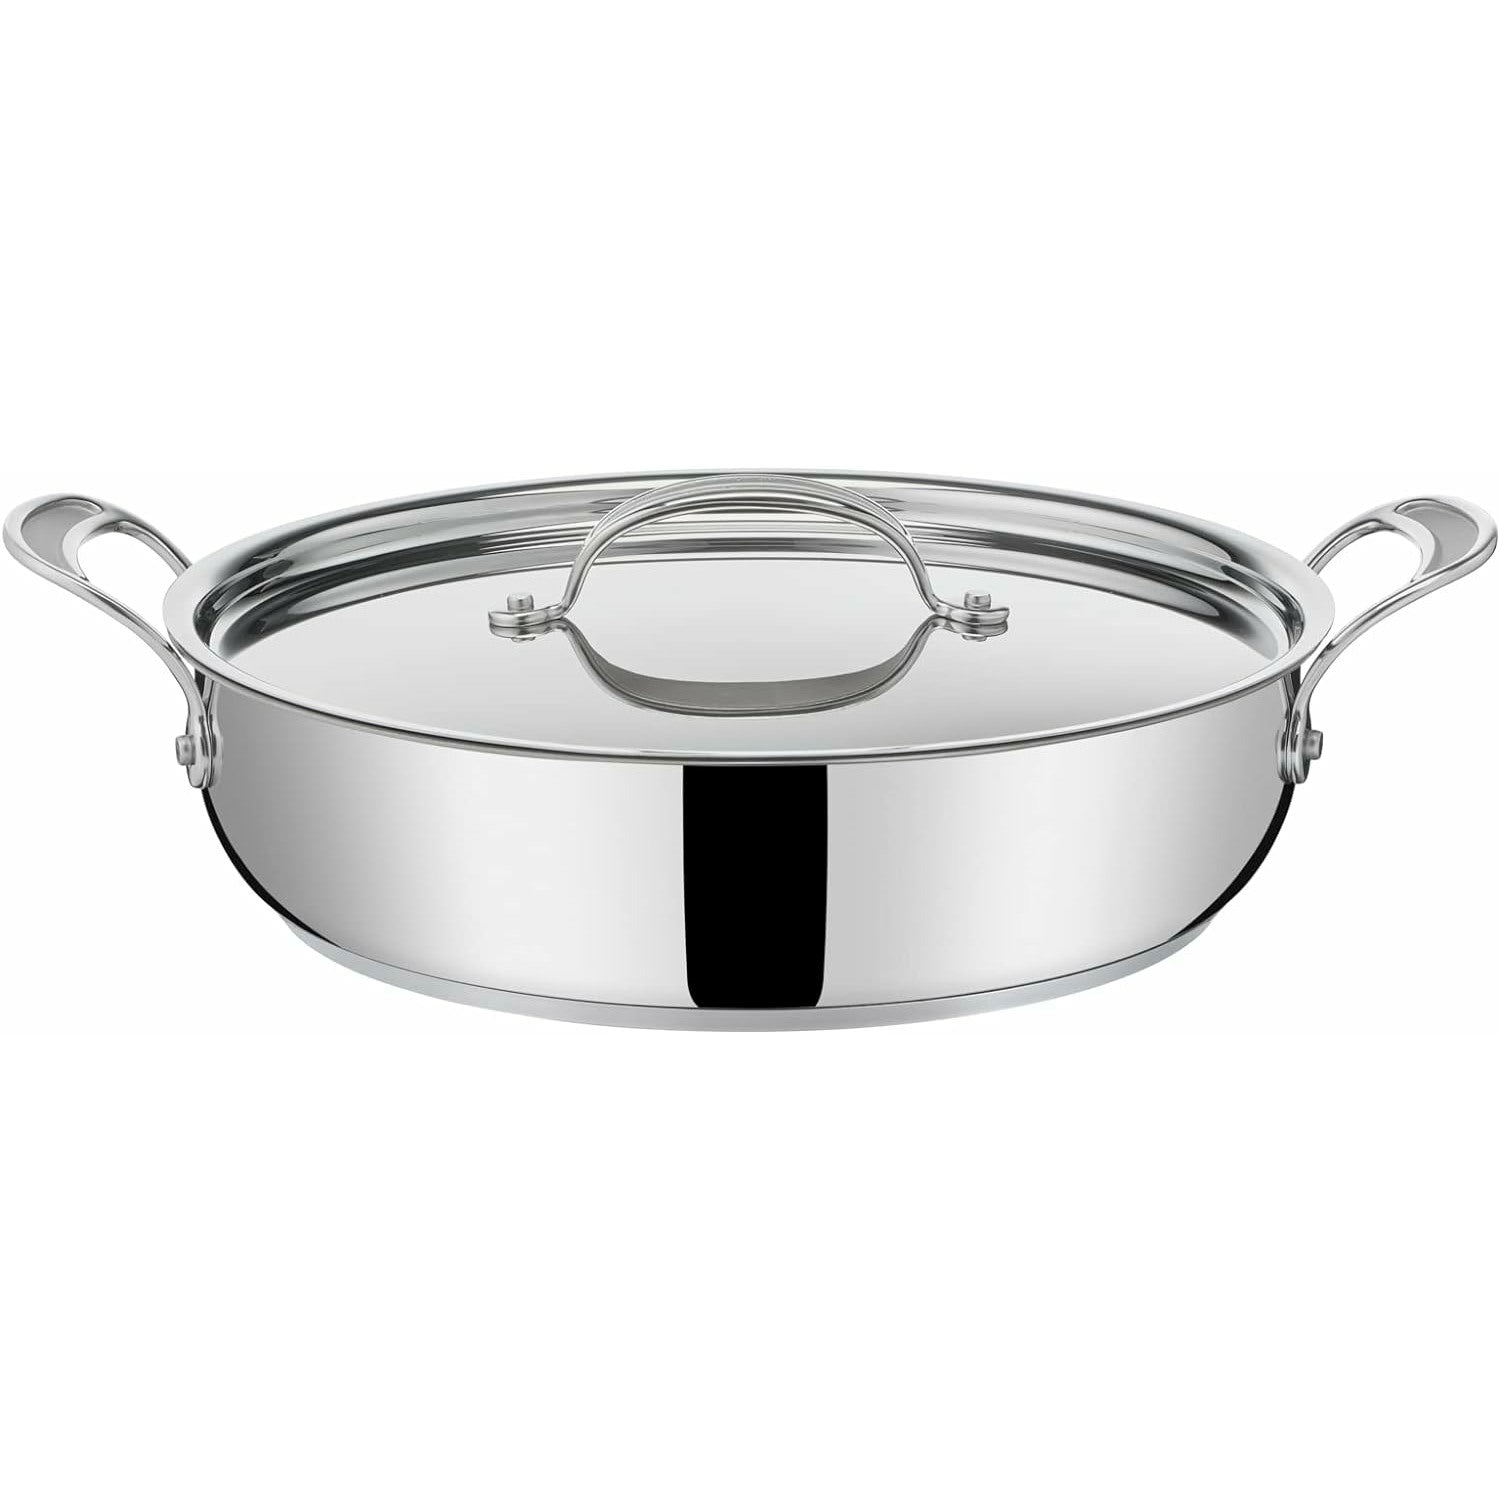 Tefal Jamie Oliver Cook's Classics Stainless Steel Shallow Pot, 30 cm